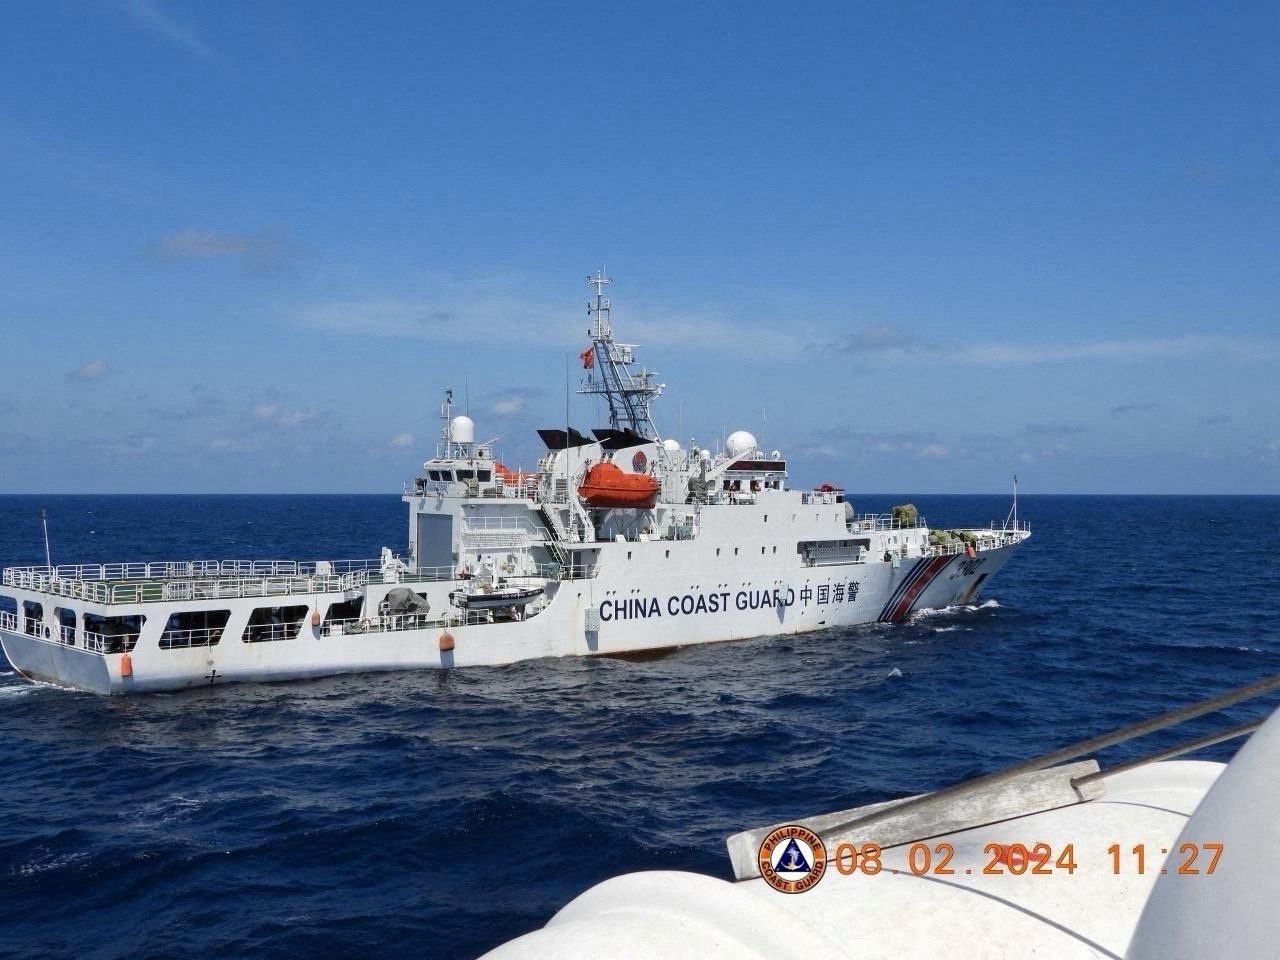 EU says new China coast guard rule adds to tensions, undermines UNCLOS